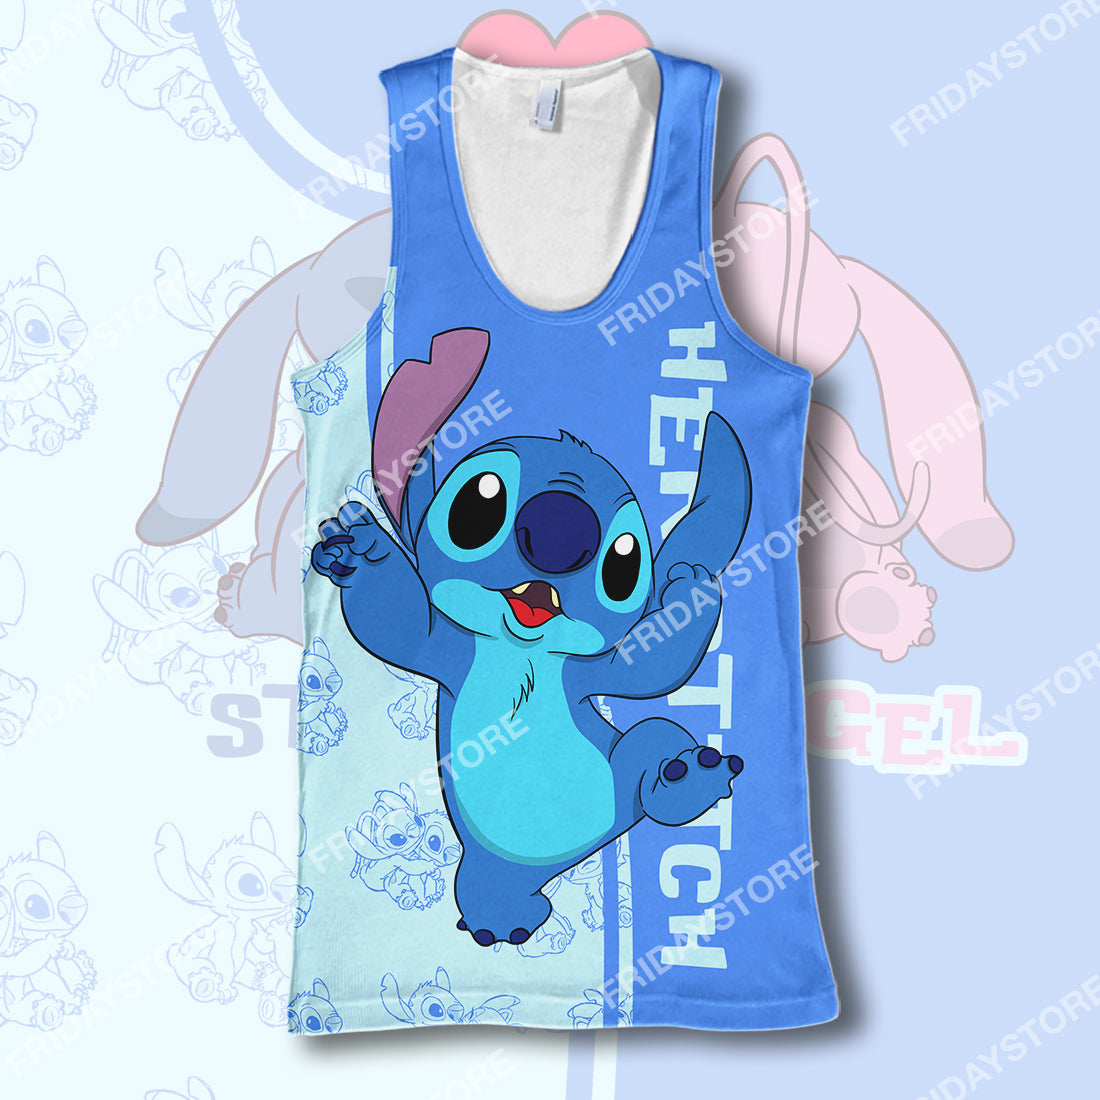 Unifinz LAS T-shirt Her Stitch Adorable Couple T-shirt Cute High Quality DN Stitch Hoodie Sweater Tank 2025